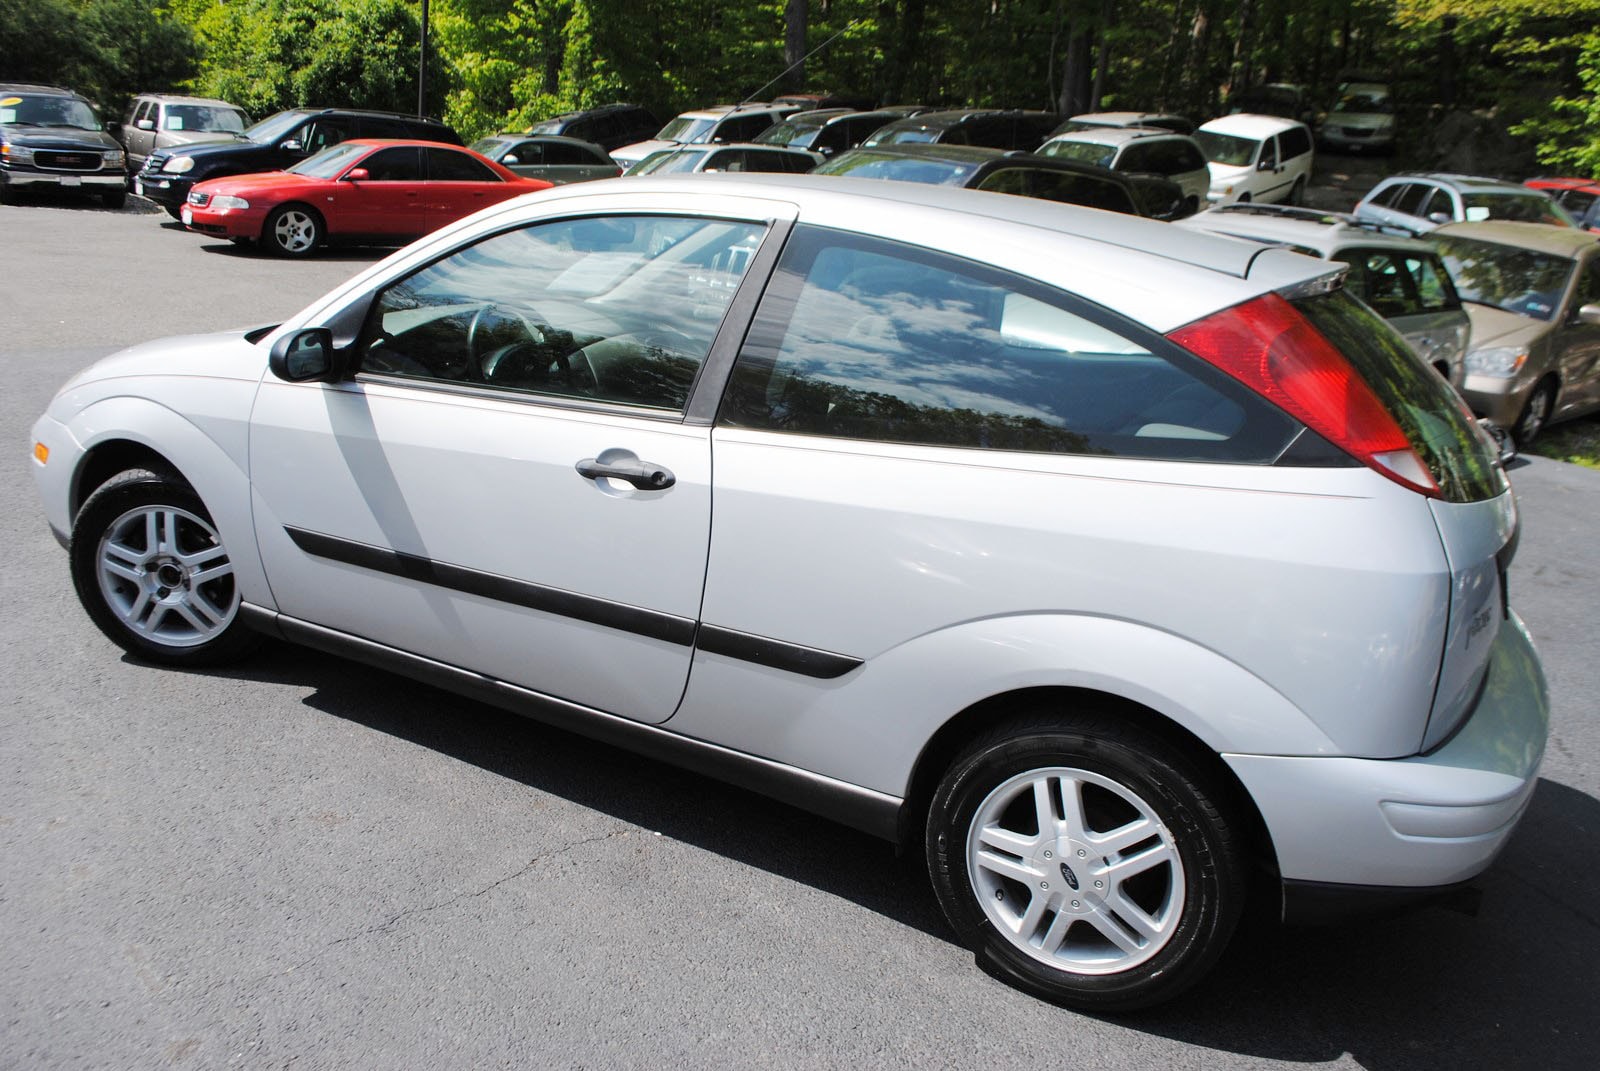 Used 2000 Ford Focus For Sale | West Milford NJ